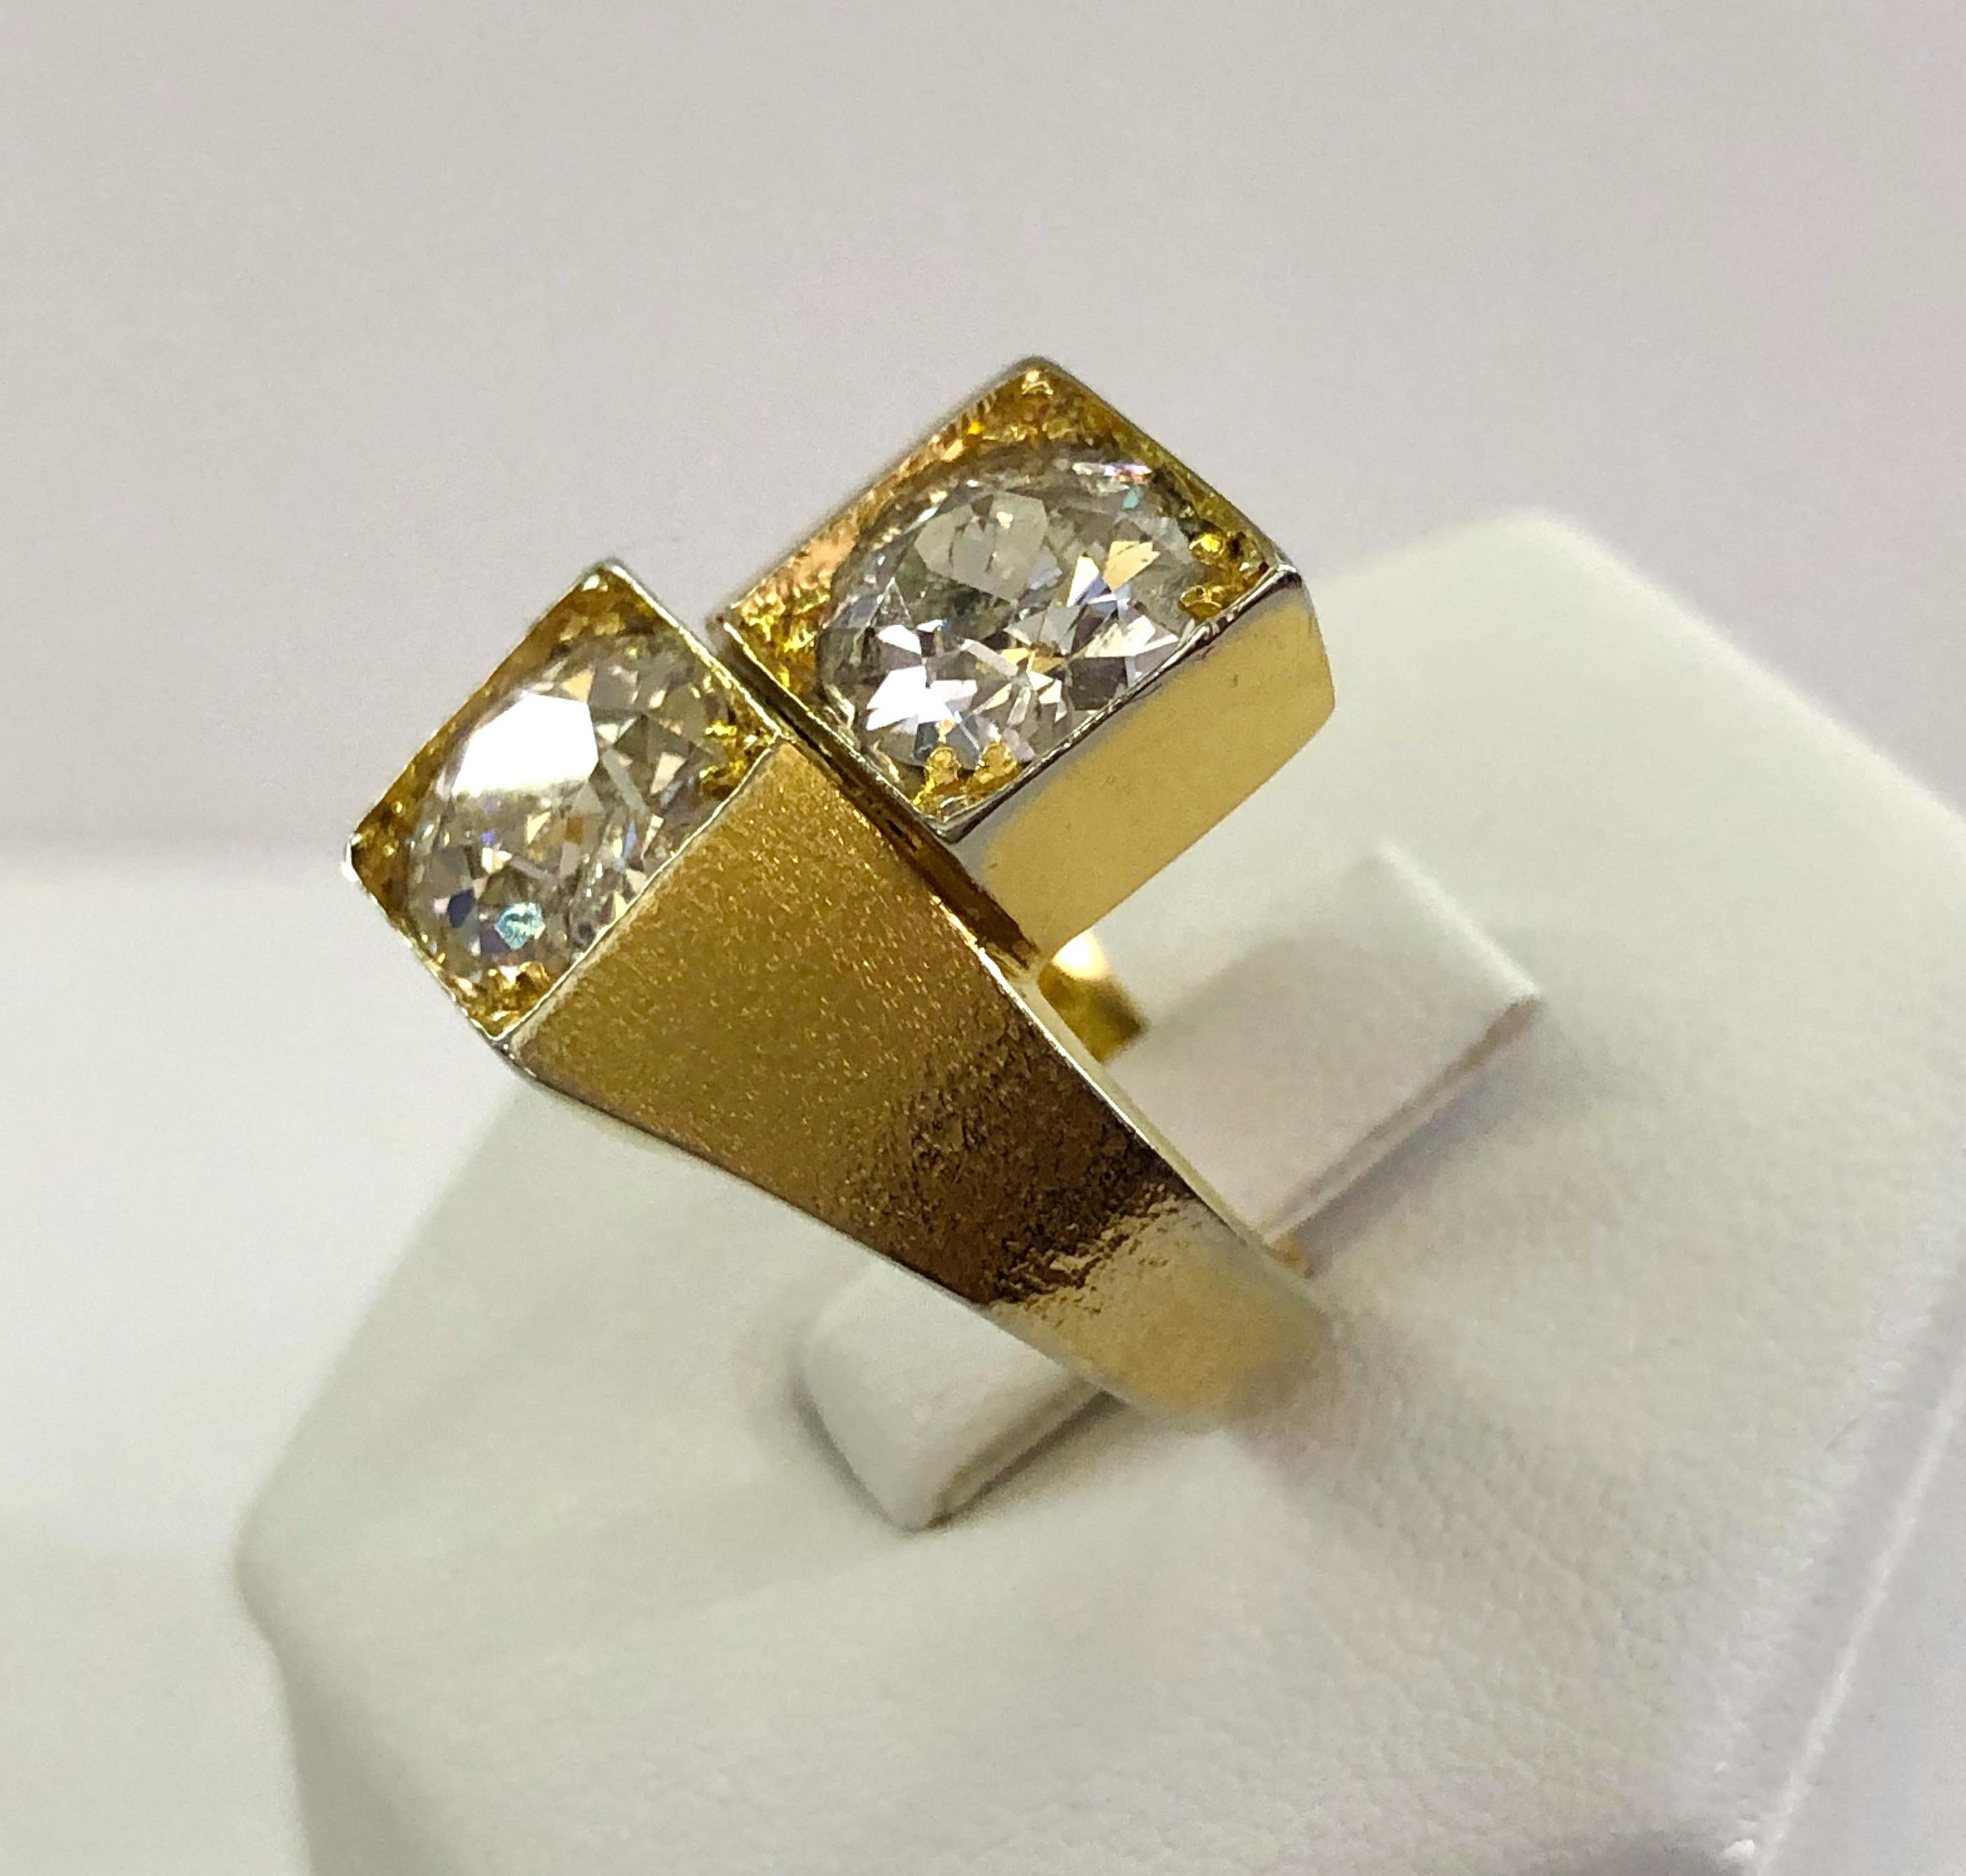 Vintage 18 karat gold ring, with 2 large diamonds of 1.5 karats each (one slightly chipped) in old mine cut, Italy 1970s
Diamond color J/K
Diamond clarify VS1
Ring size US 5